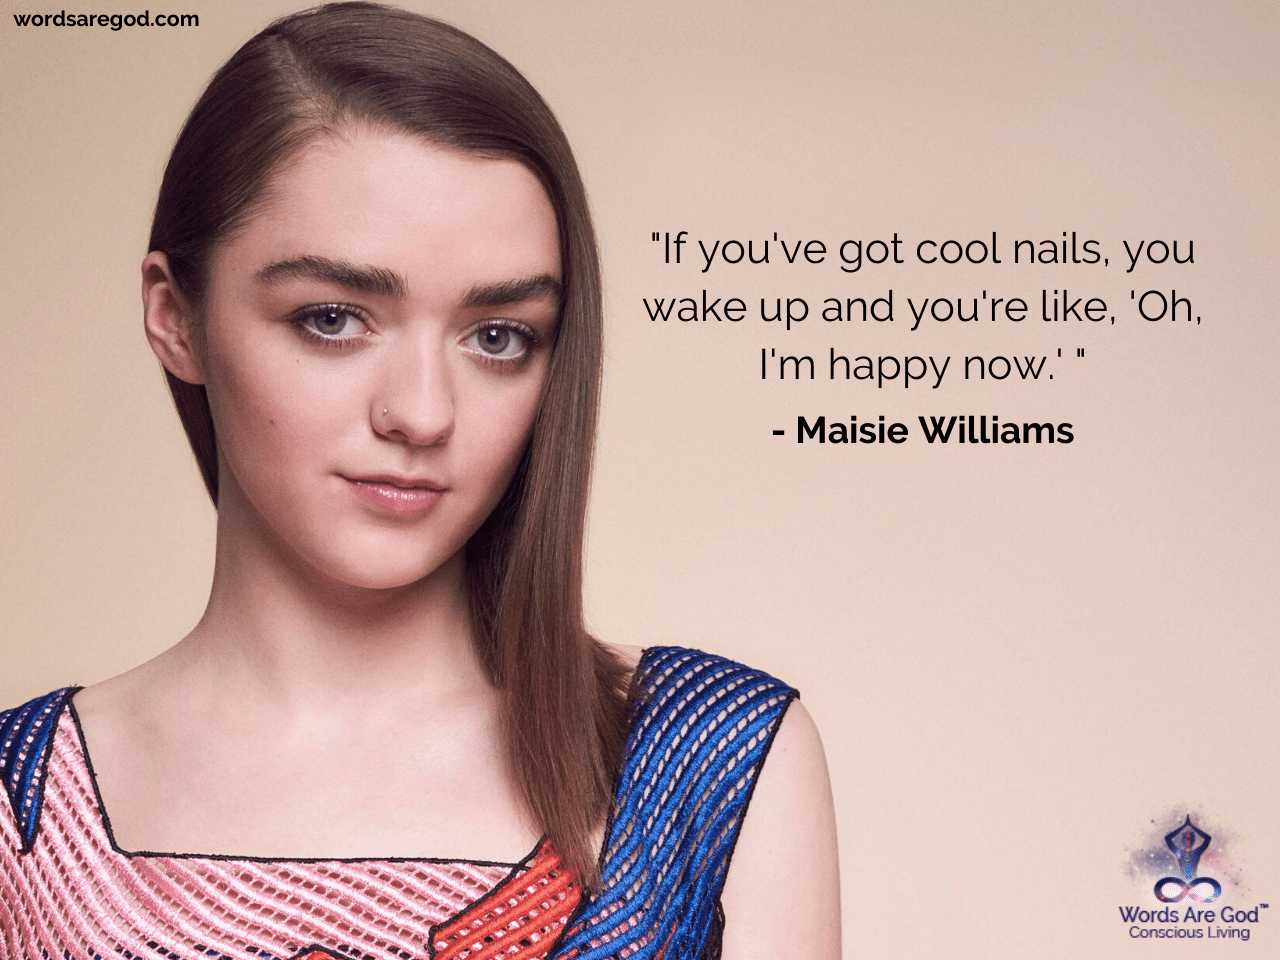 Maisie Williams Motivational Quotes by Maisie Williams